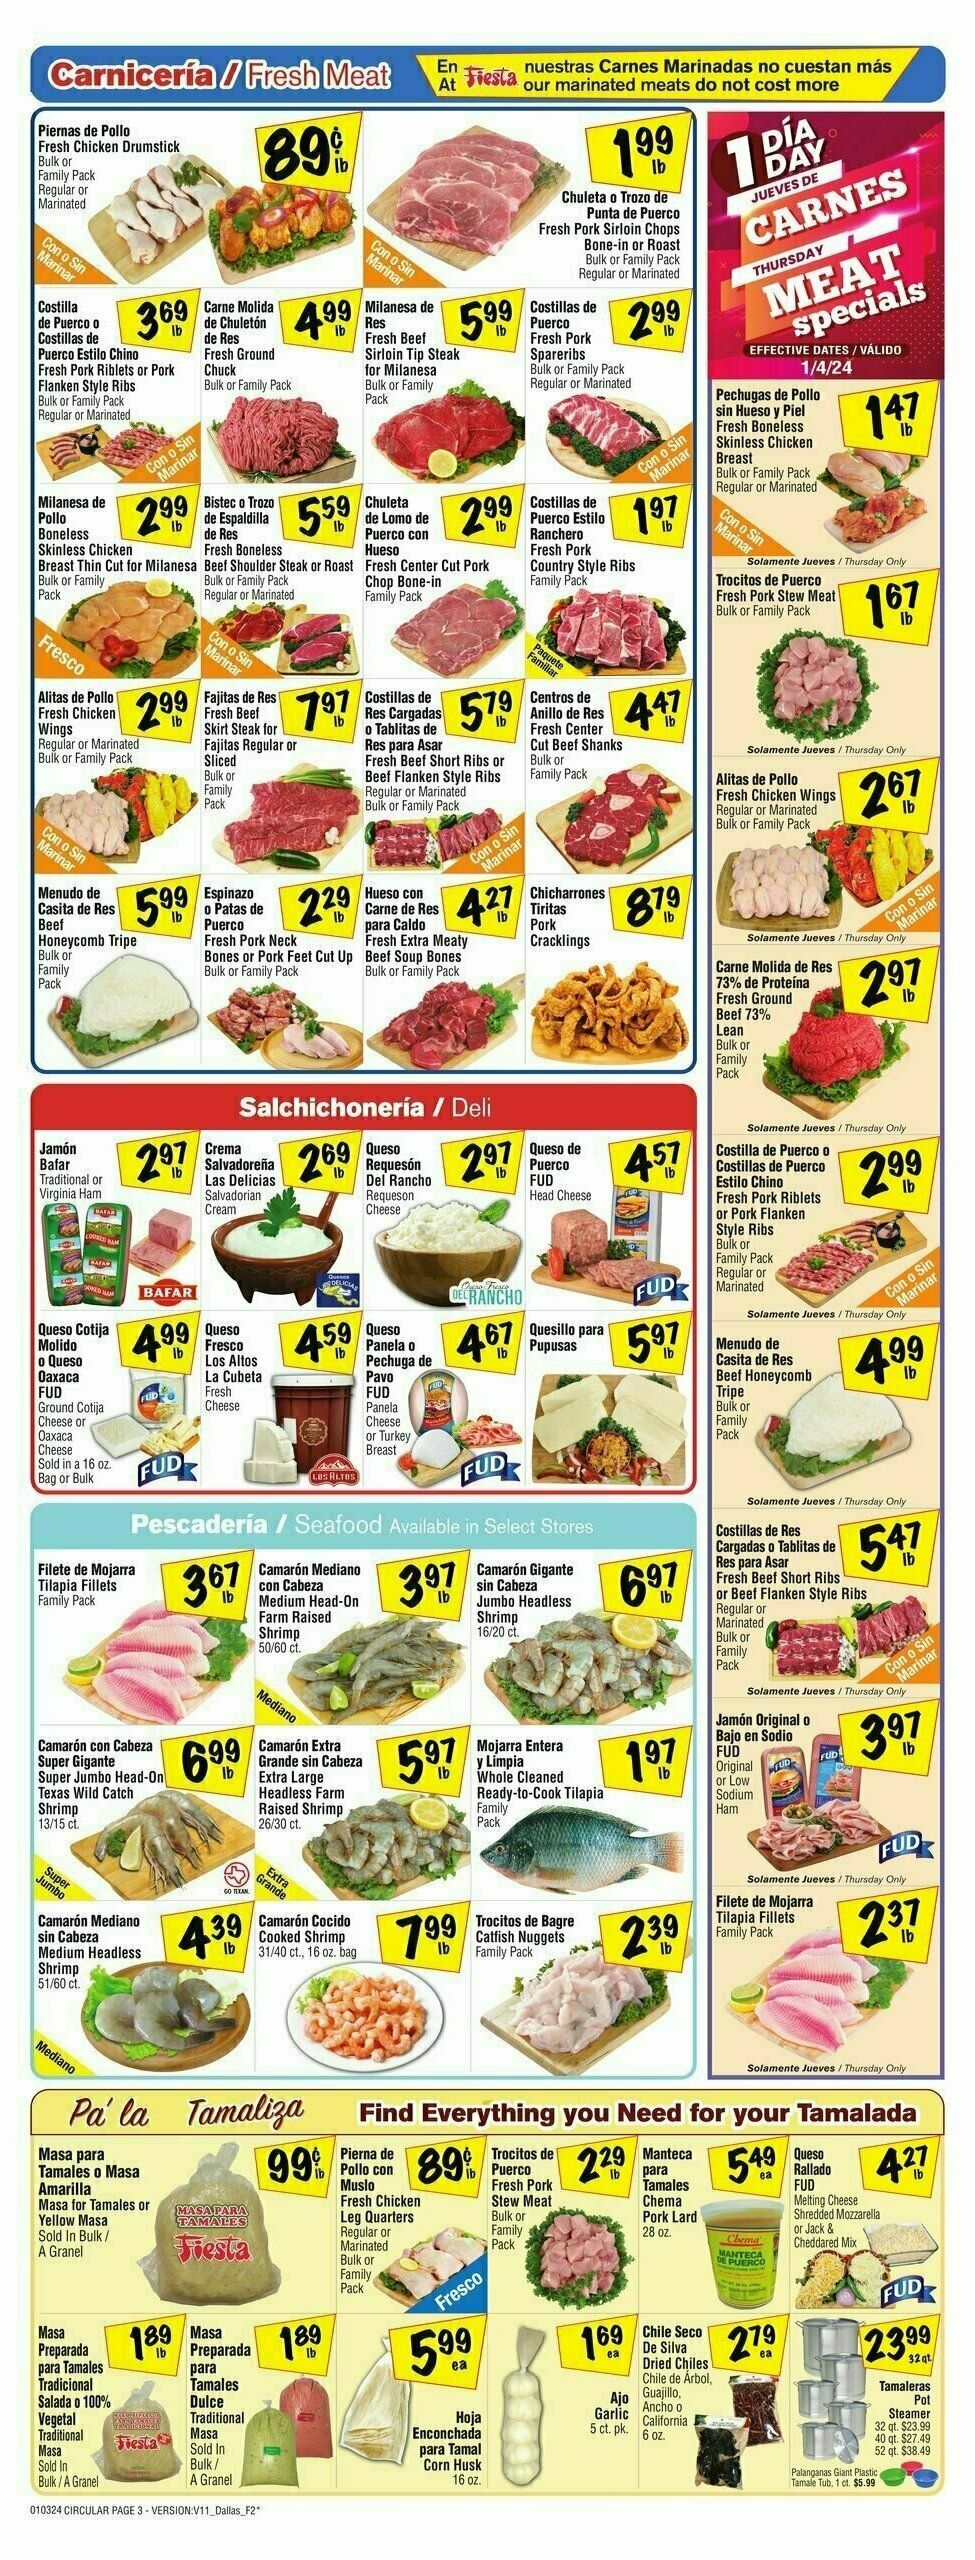 Fiesta Mart Weekly Ad from January 3